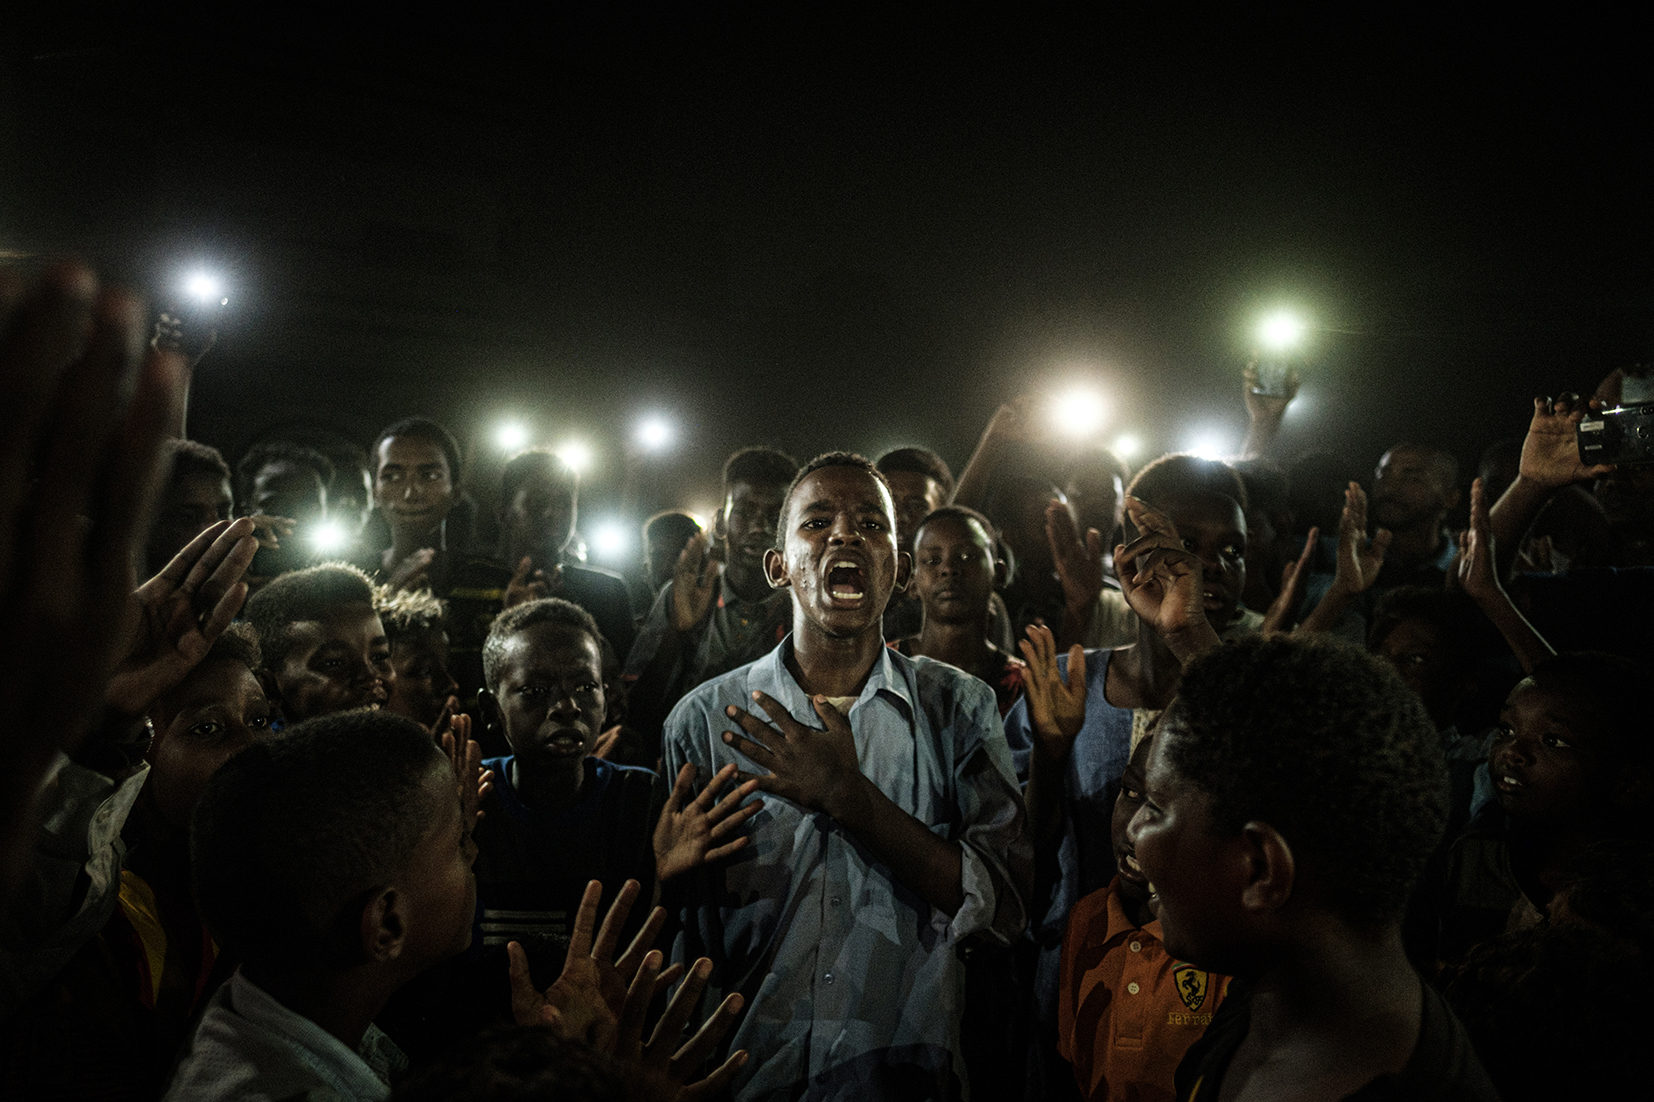 A young Sudanese man stand with his hand on his heart, mid sentence. He is surrounded by a crowd holding up their mobile phones to illuminate him. 